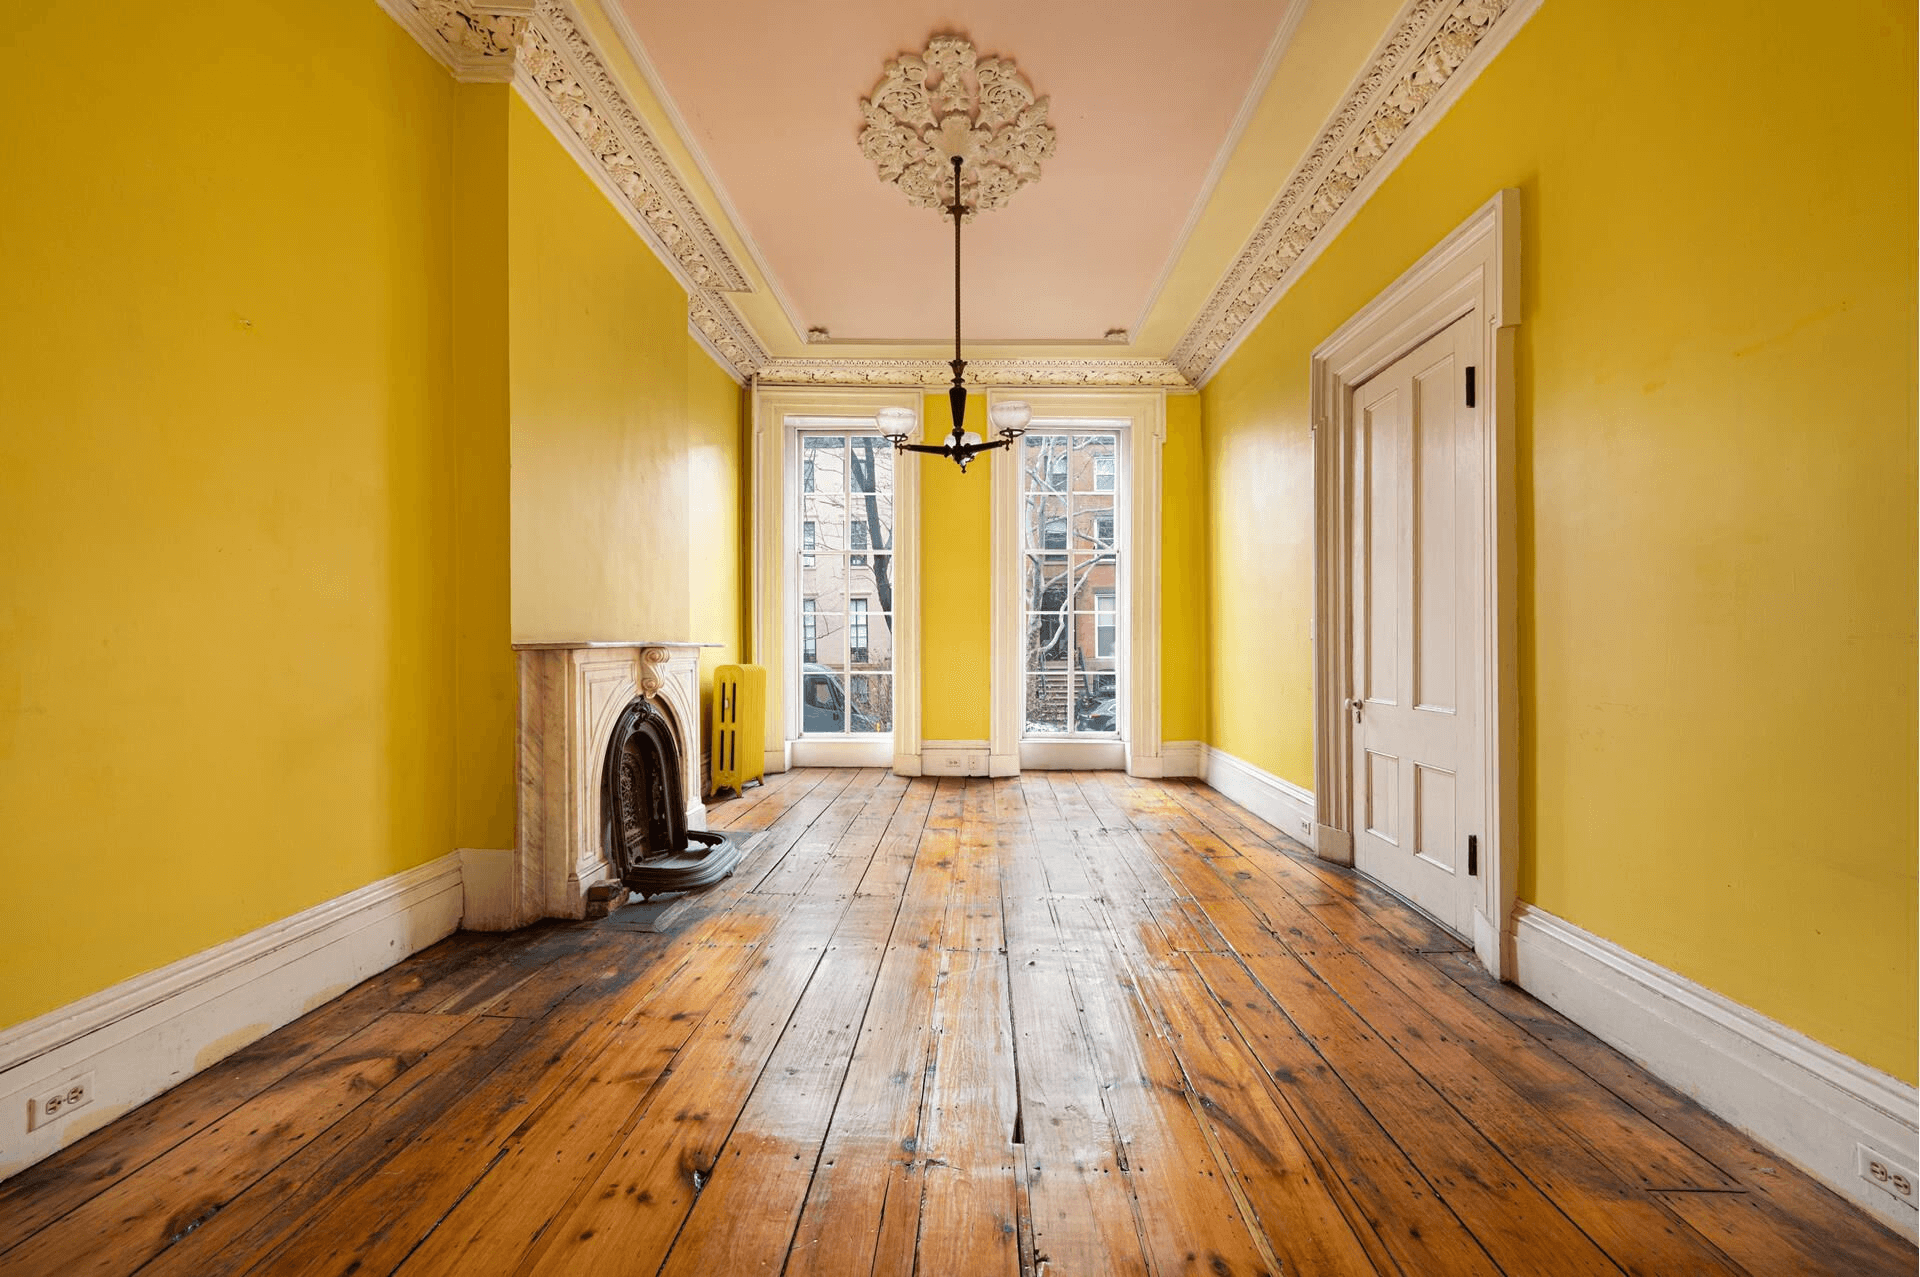 parlor with plasterwork and marble mantel